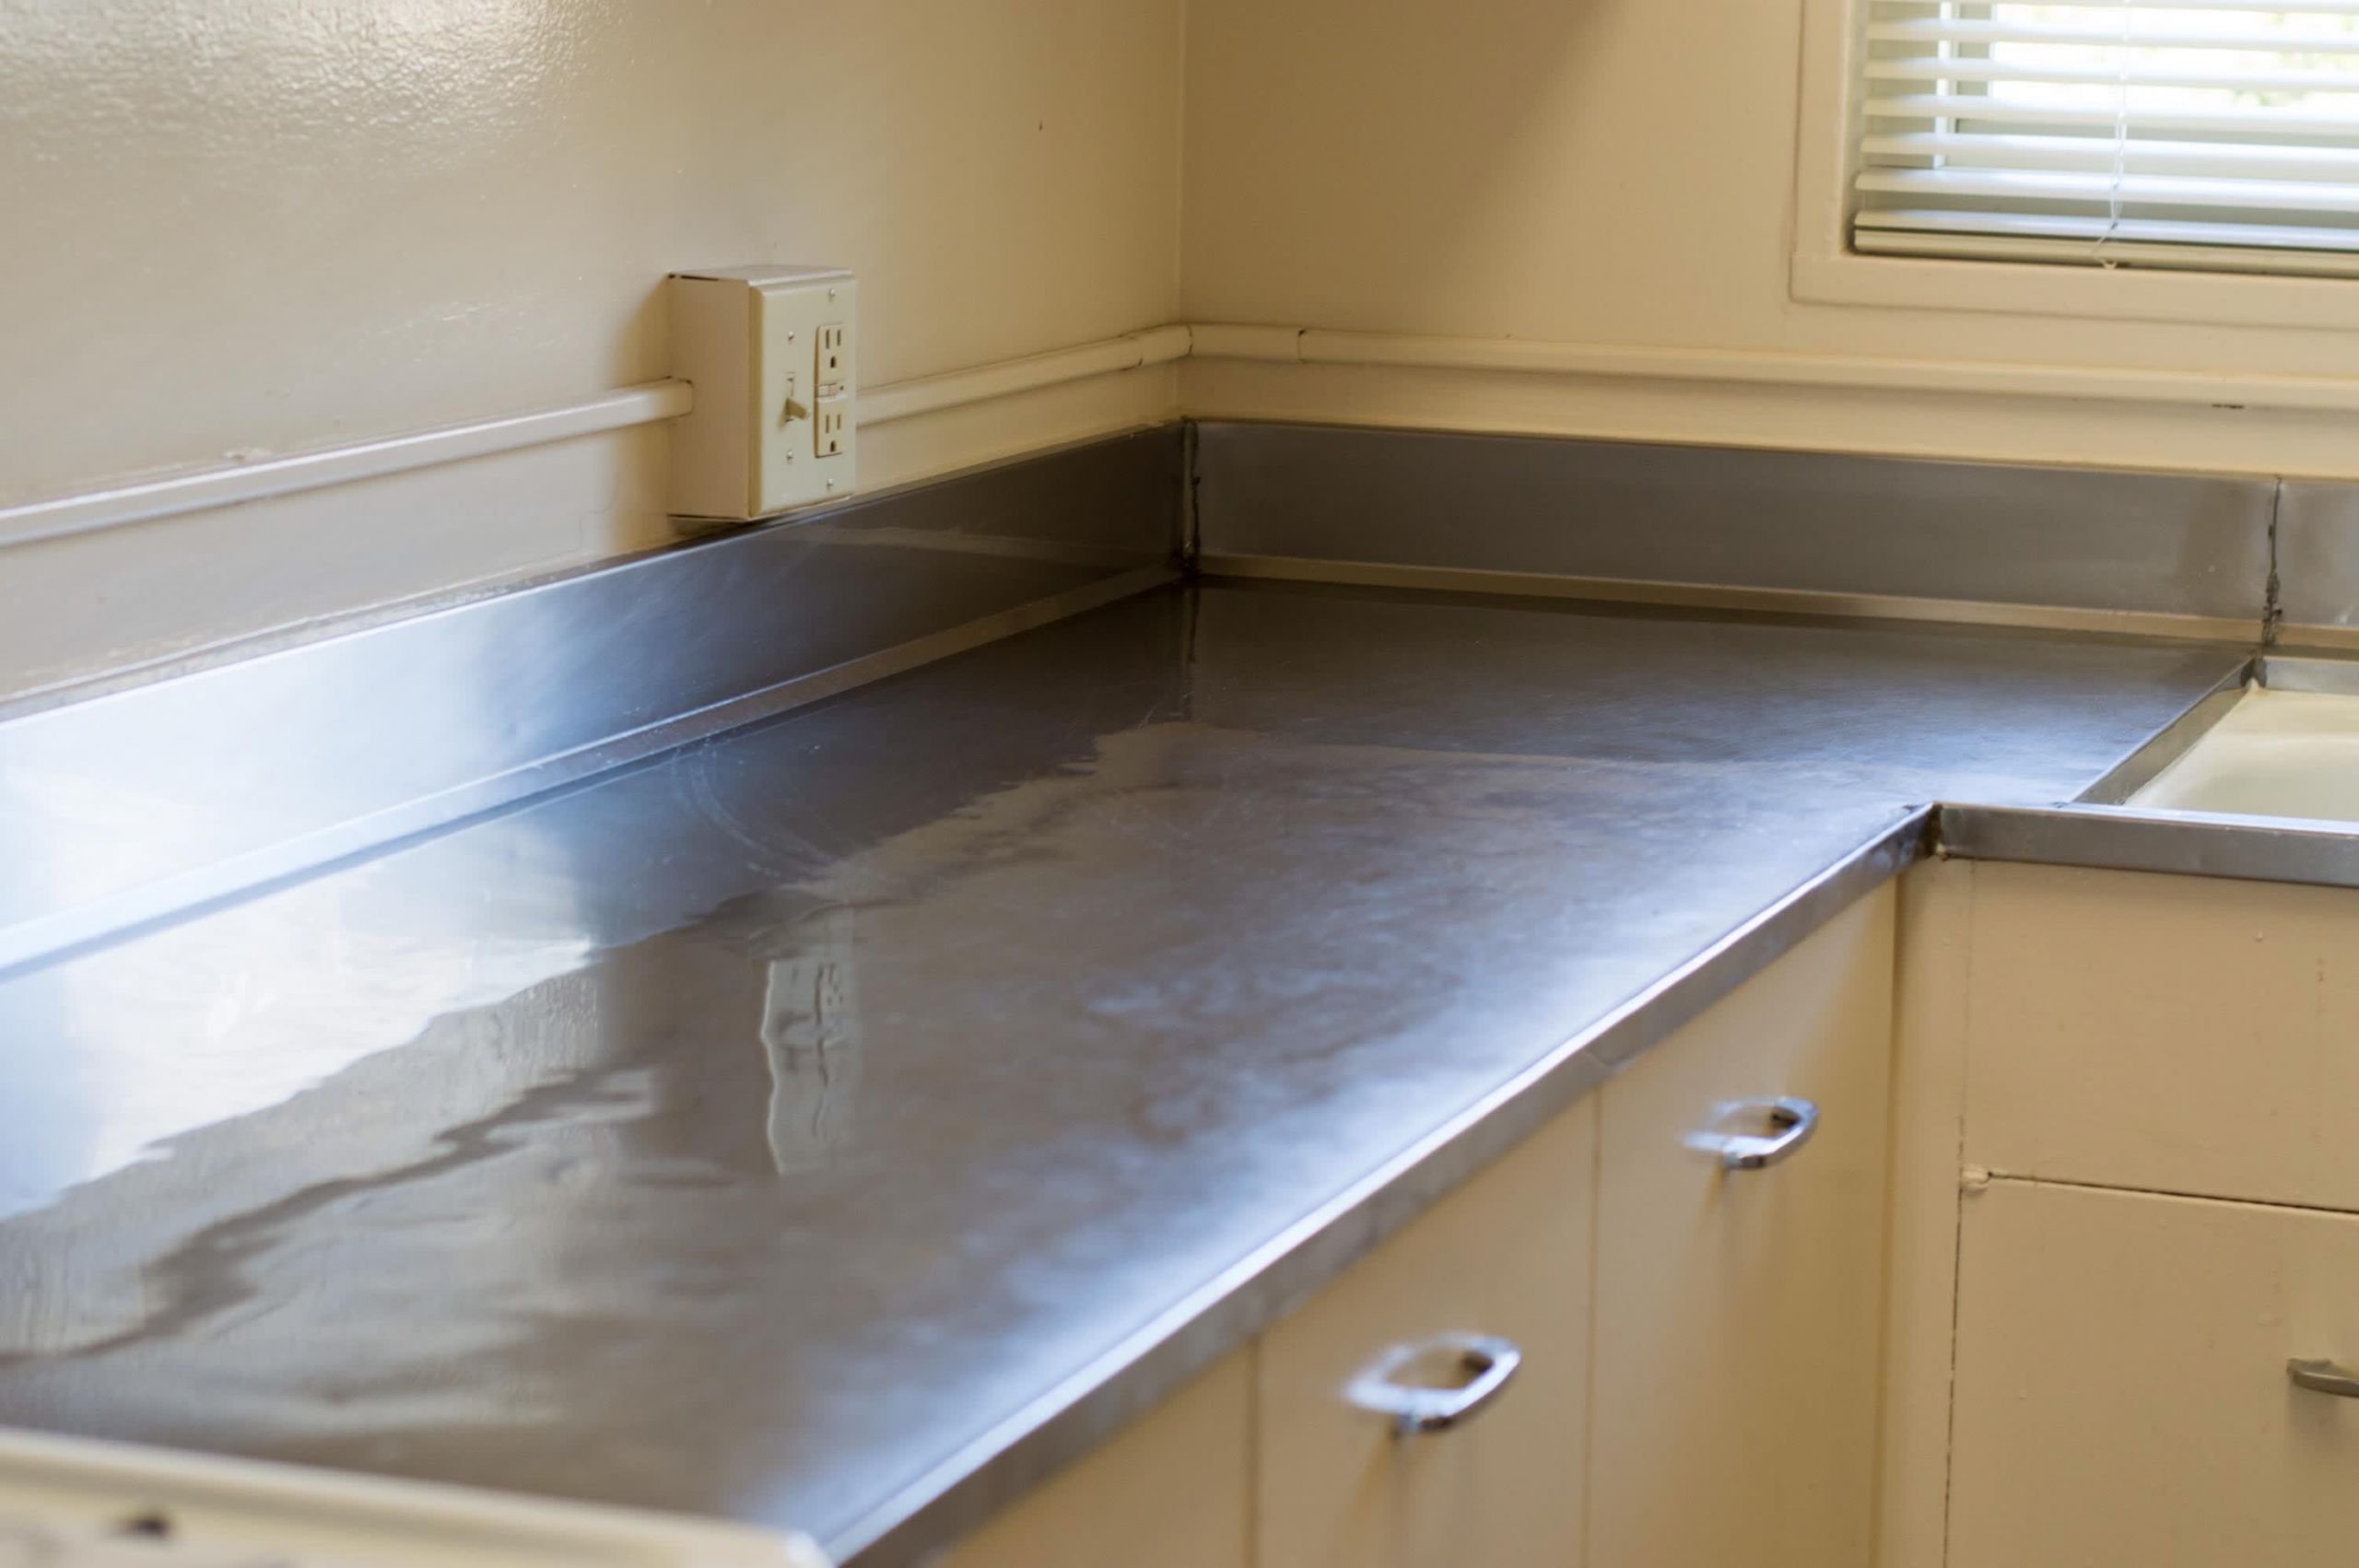 Does Vinegar Disinfect Kitchen Counters
 How To Clean Stainless Steel Countertops To a Shiny